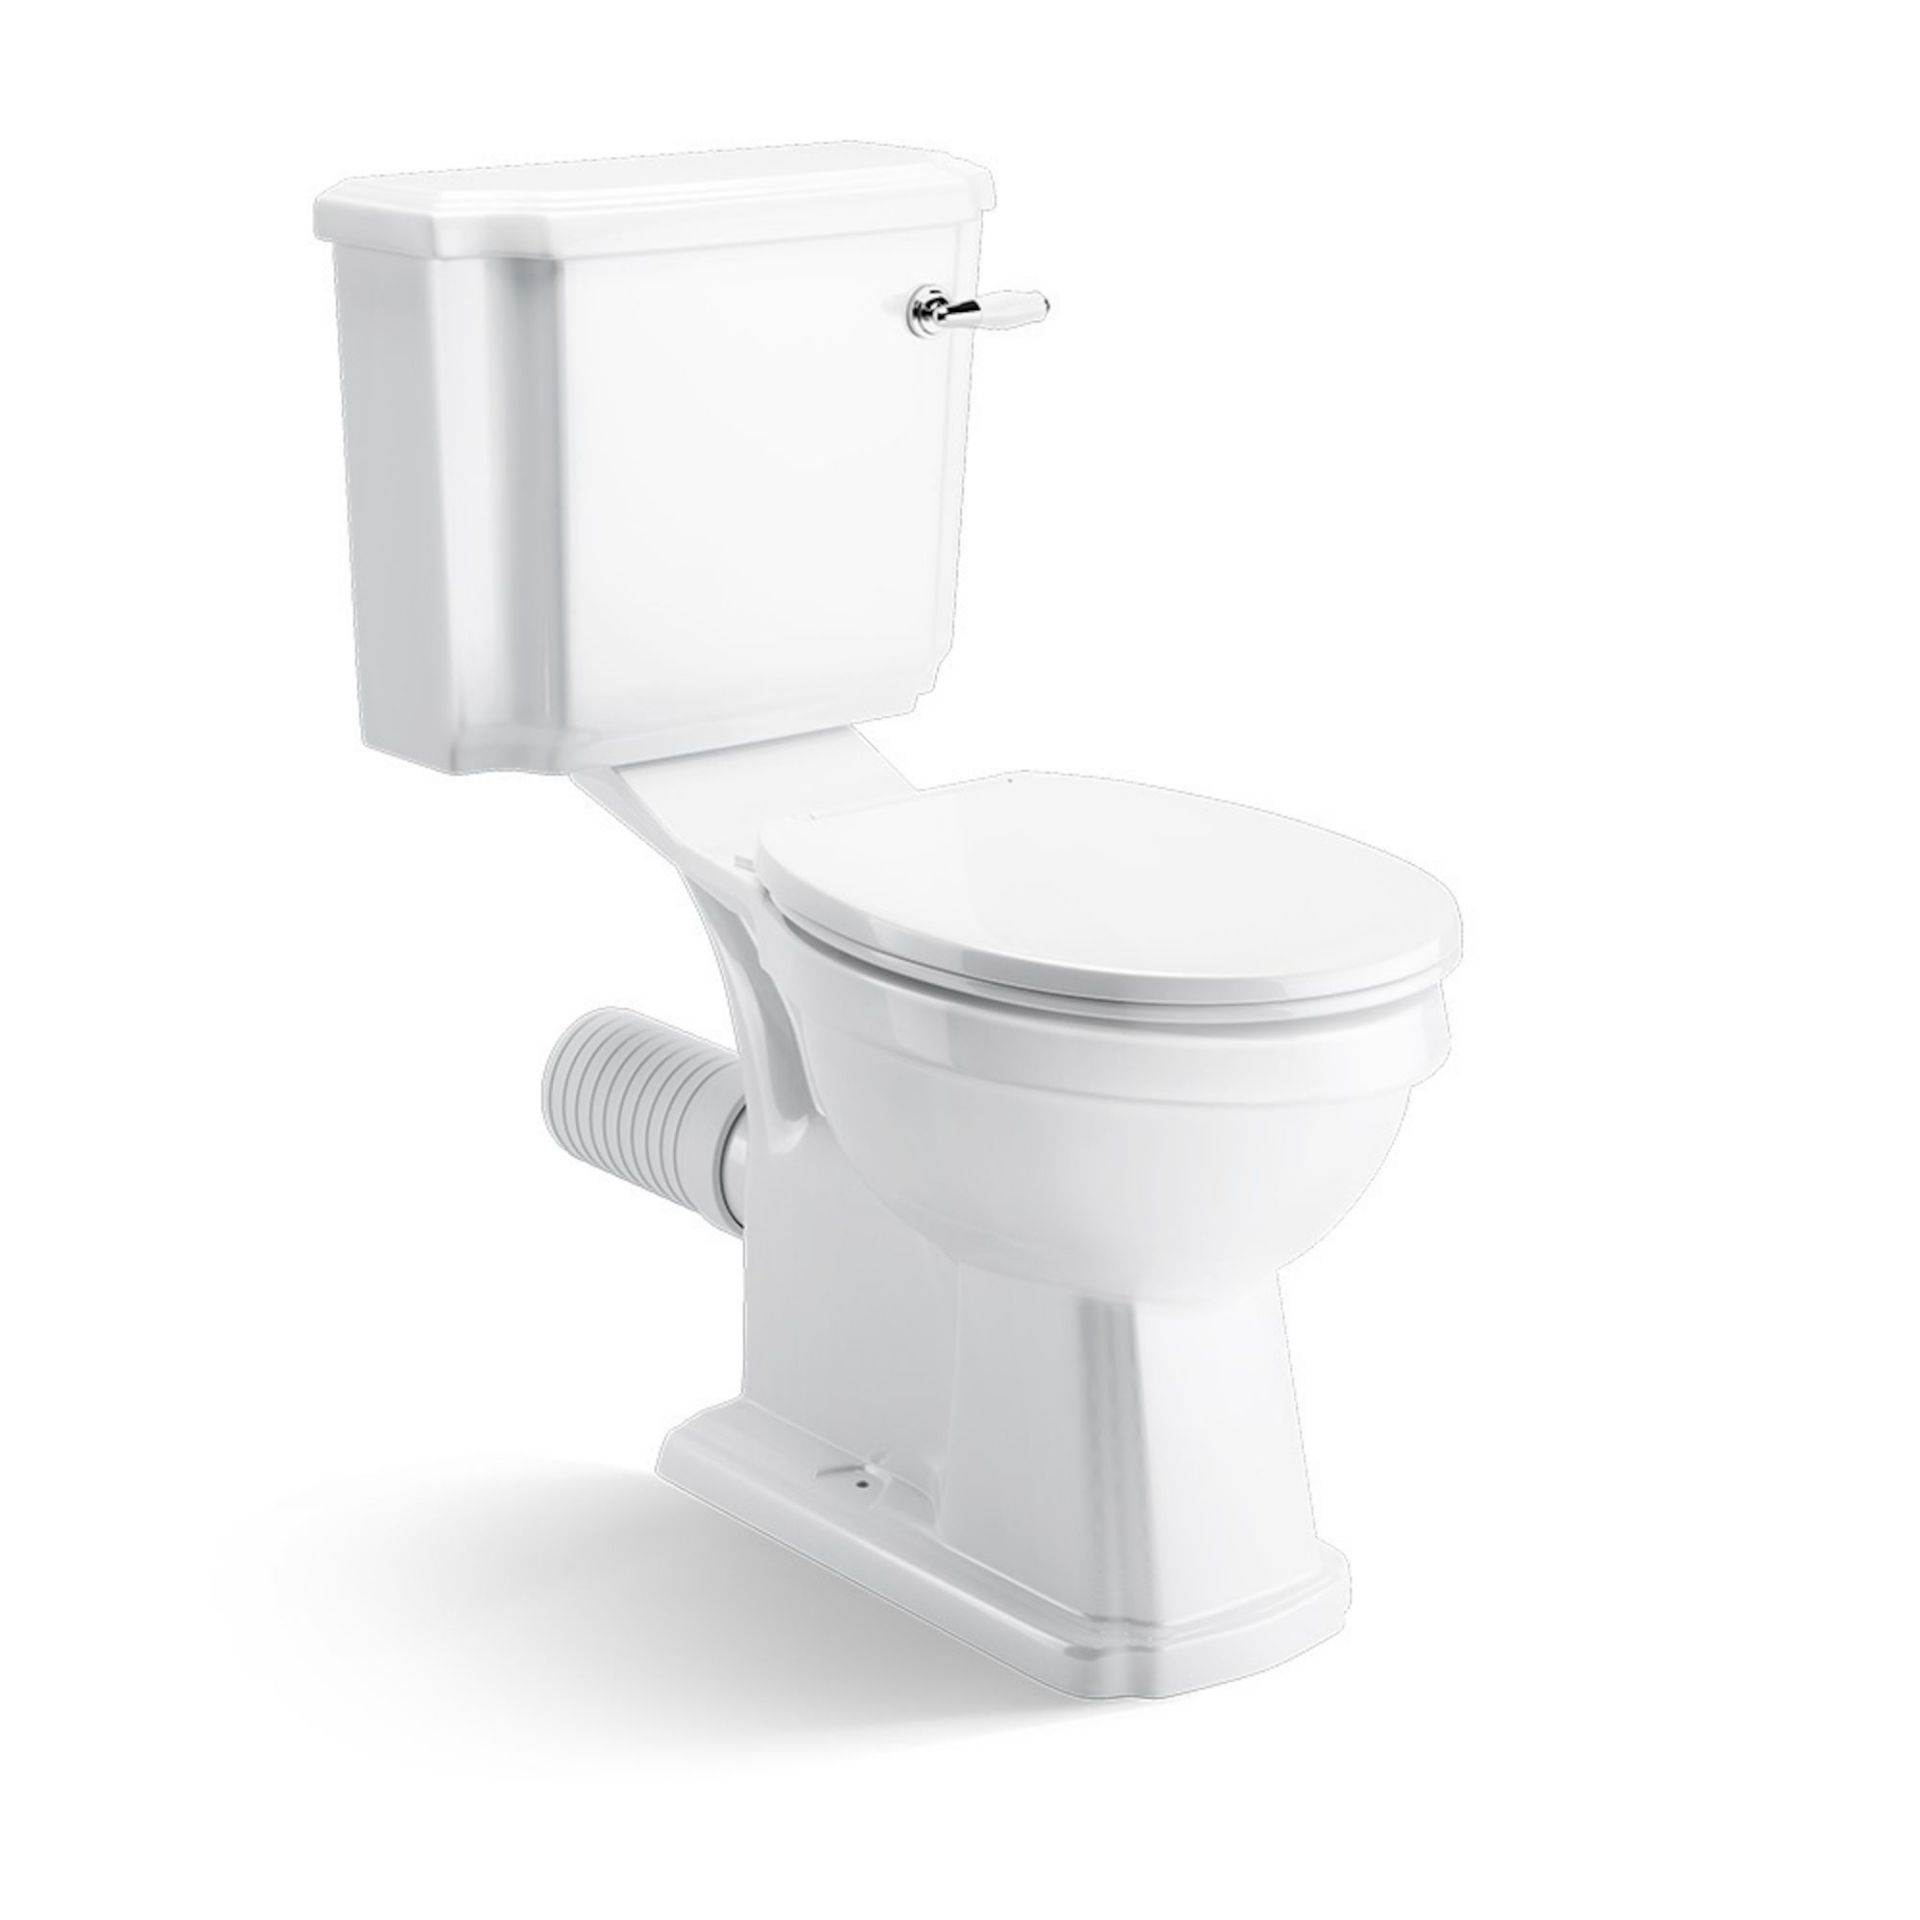 New & Boxed Cambridge Traditional Close Coupled Toilet & Cistern - White Seat.Ccg629Pan. - Image 2 of 2